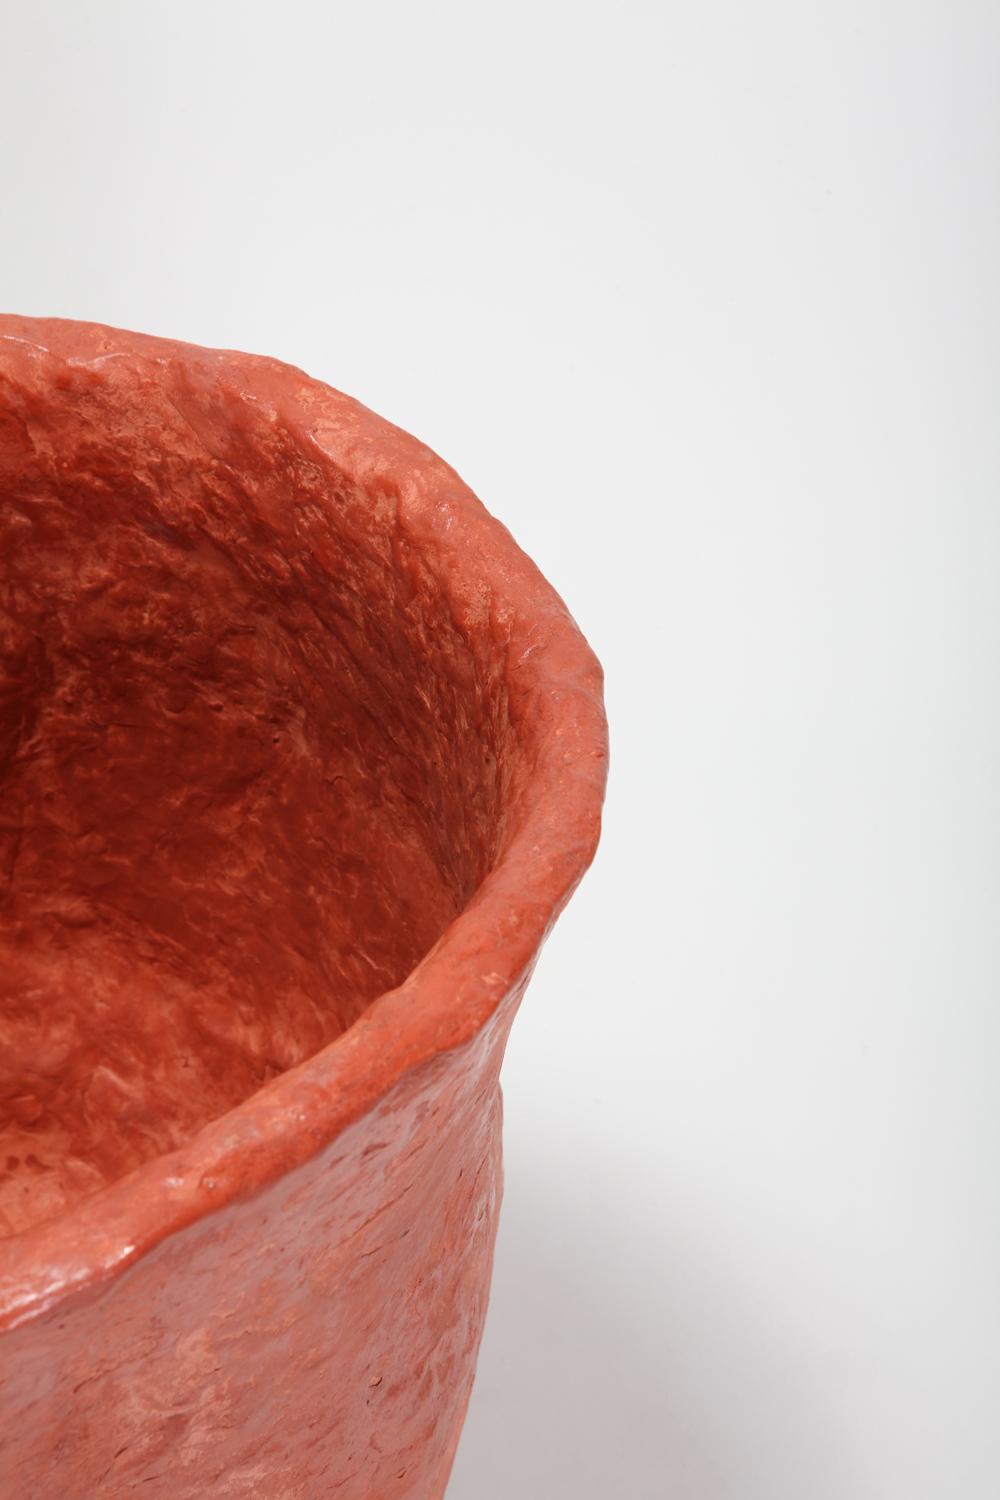 Organic Modern Cotta Vessel by Decio Studio Made at alfa.brussels for Everyday Gallery